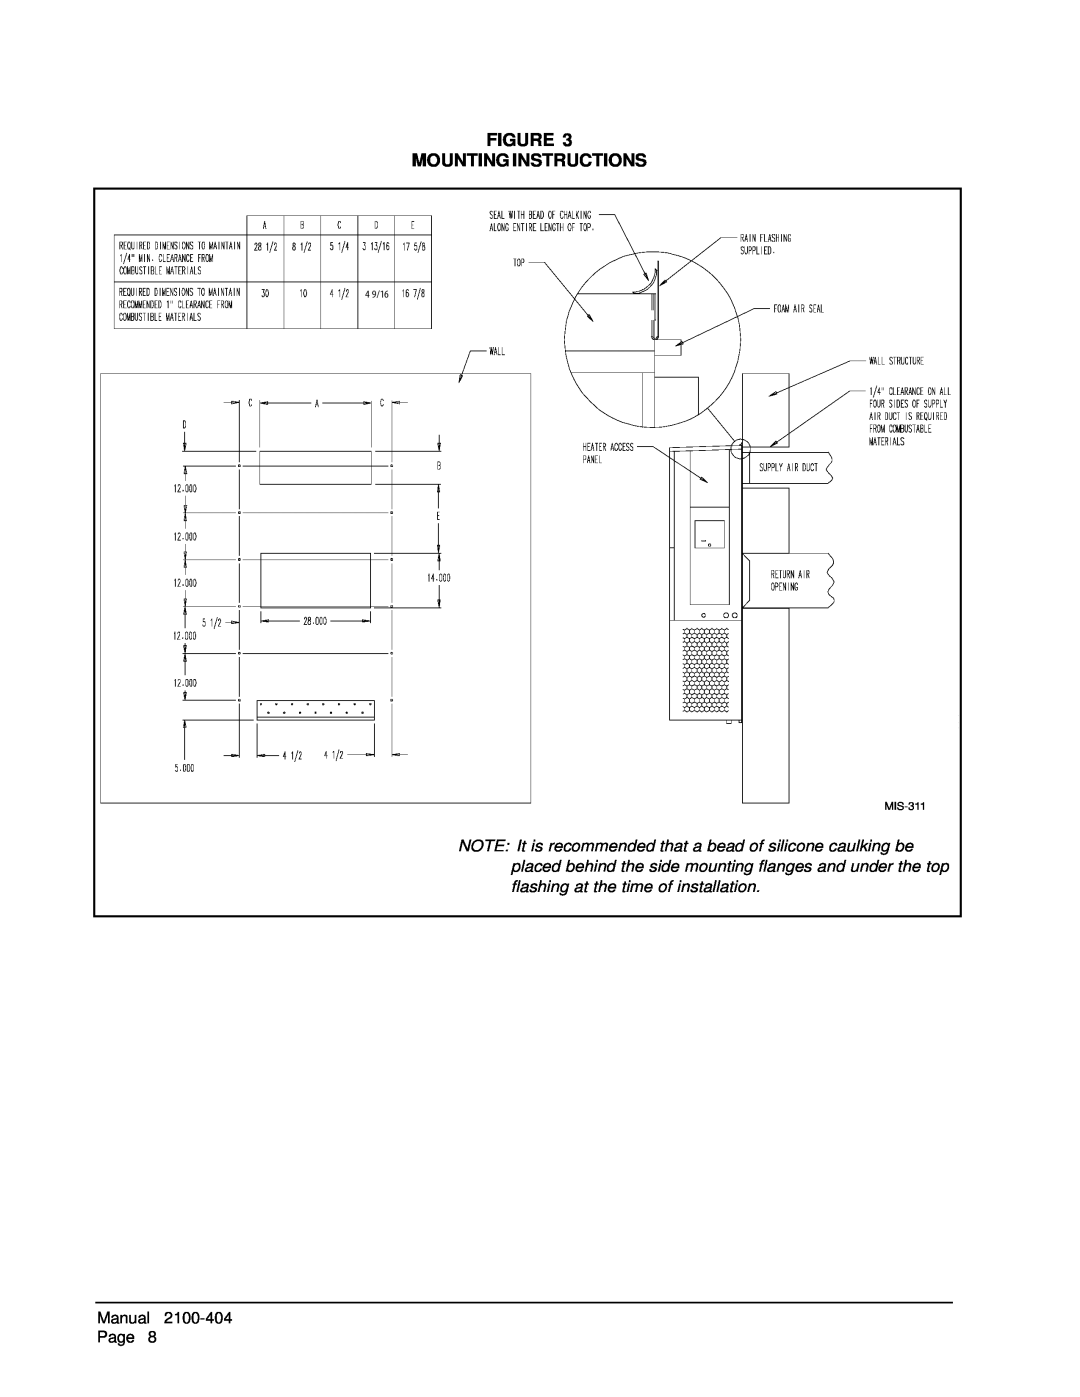 Bard MIS-656 installation instructions Figure Mounting Instructions, Manual 2100-404Page, 4 9/16, MIS-311 